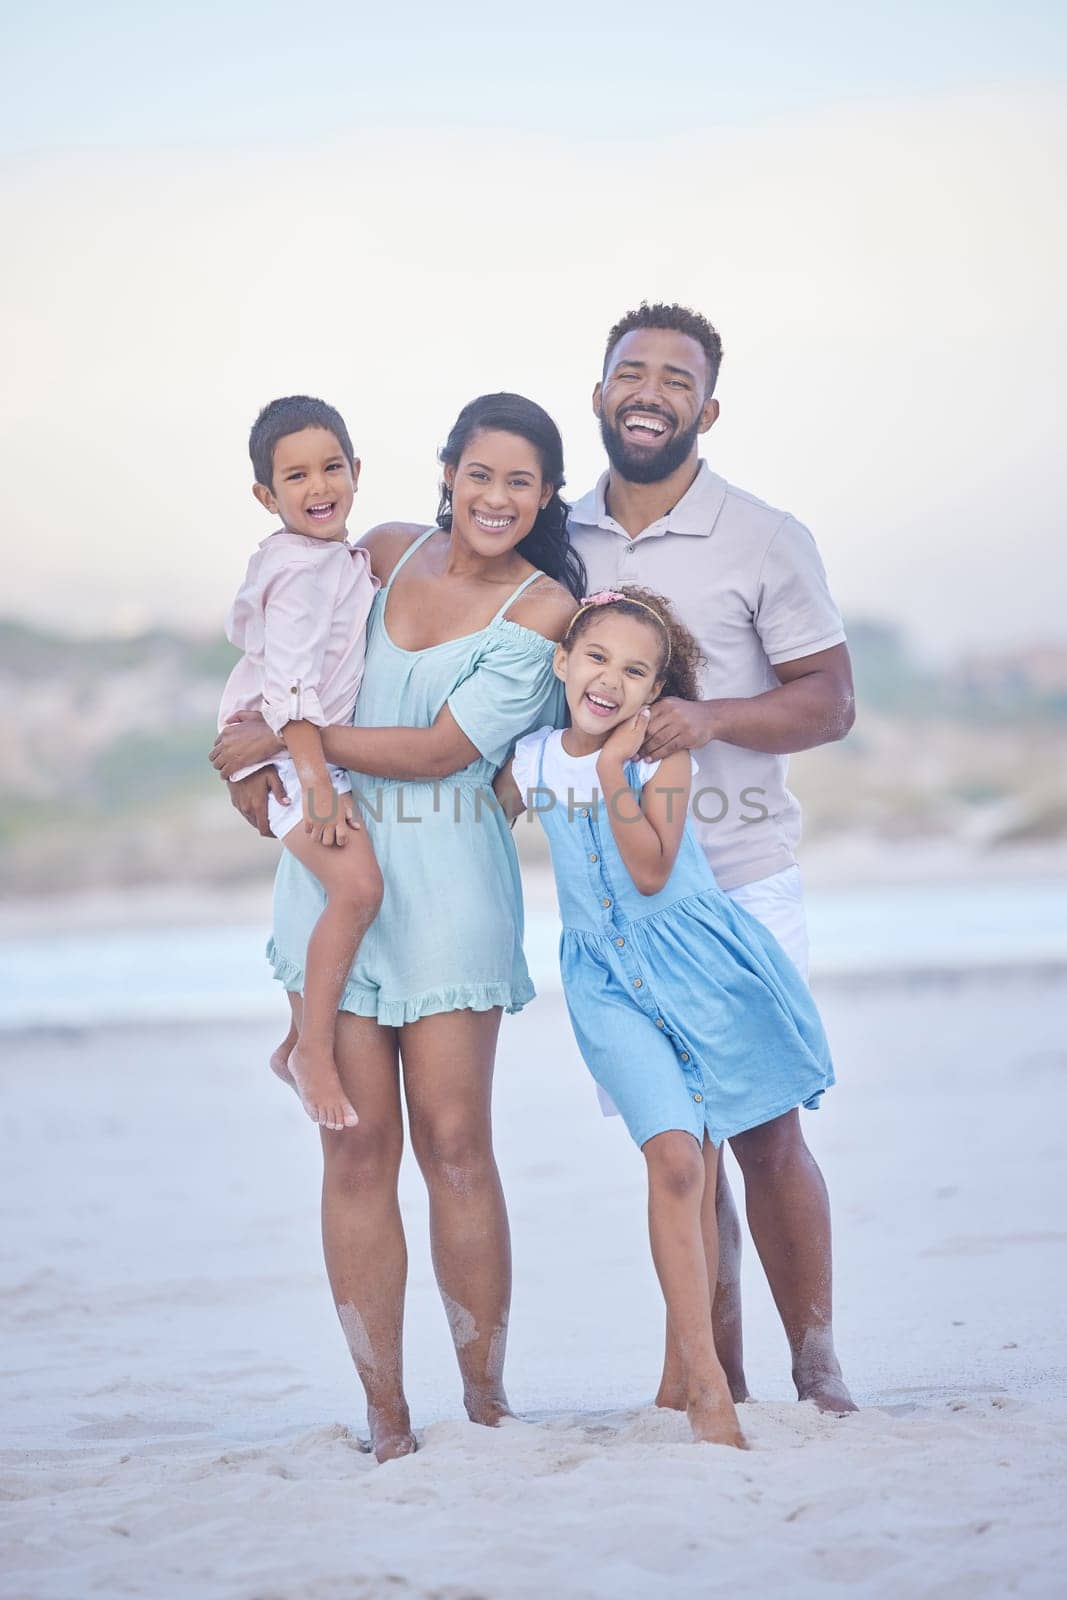 Family, parents or portrait of happy kids at sea to travel with joy, smile or love on holiday vacation. Mom, beach or father smiling with children in Mexico with happiness bonding or walking together.